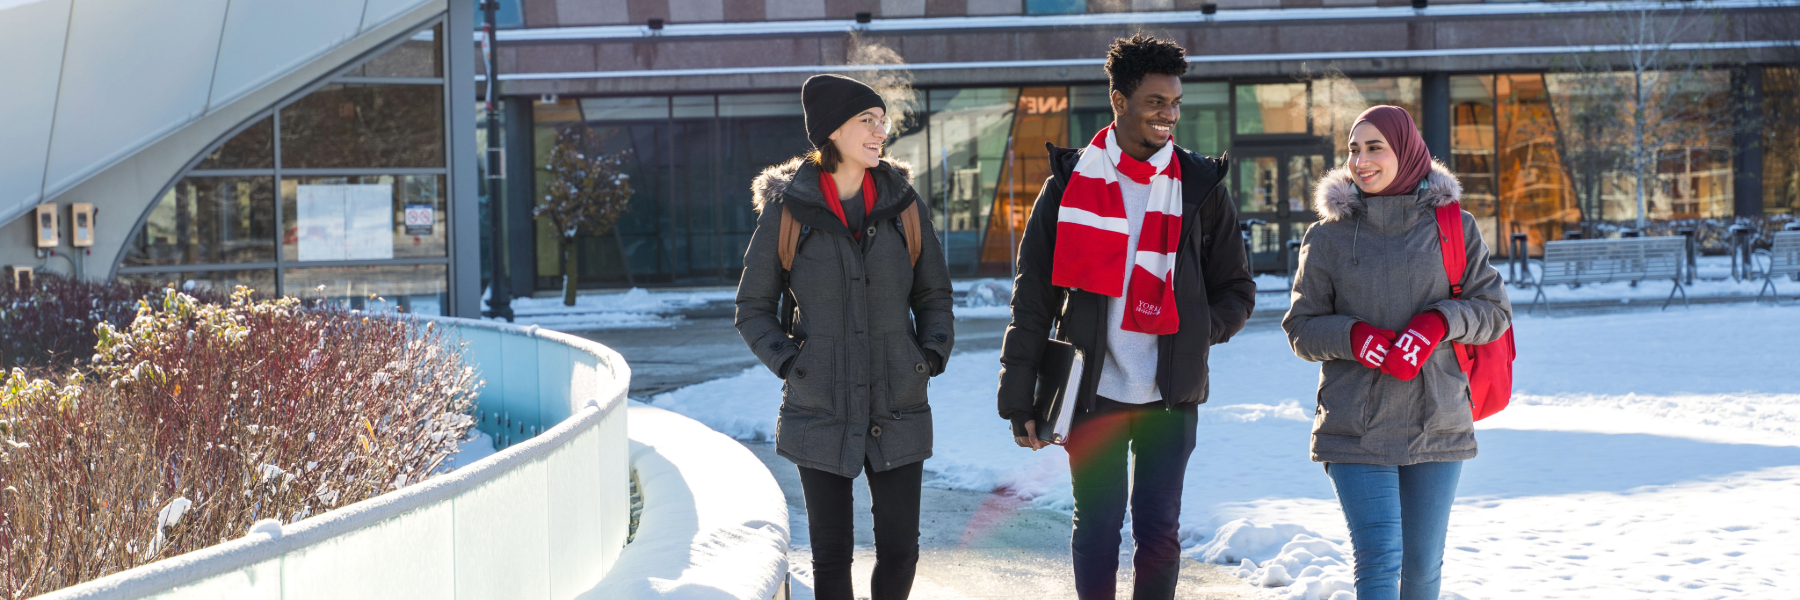 Students walking near subway on Keele Campus in winter